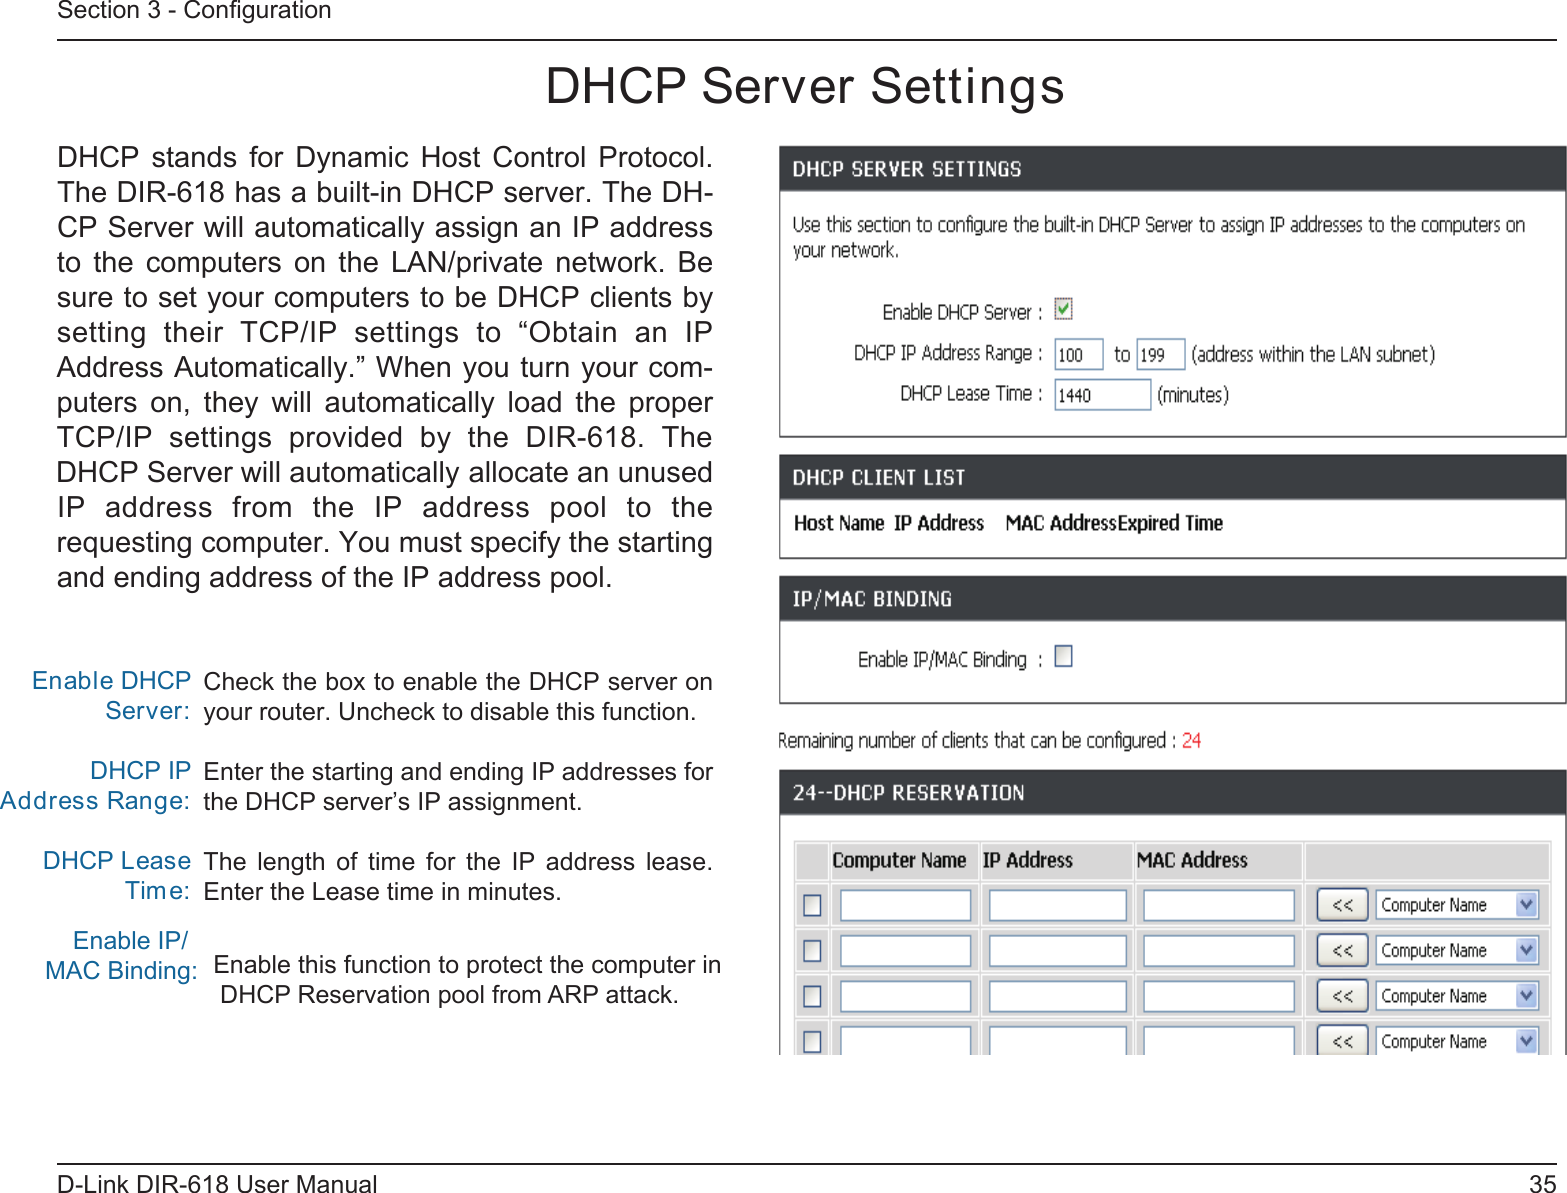 35D-Link DIR-618 User ManualSection 3 - ConﬁgurationCheck the box to enable the DHCP server on your router. Uncheck to disable this function.Enter the starting and ending IP addresses forthe DHCP server’s IP assignment.The  length  of  time  for  the  IP  address  lease.Enter the Lease time in minutes.Enable DHCP Server:DHCP IPAddress Range:DHCP Lease Tim    Enable IP/MAC Binding:e:DHCP Server SettingsDHCP  stands  for  Dynamic  Host  Control  Protocol.The DIR-618 has a built-in DHCP server. The DH-CP Server will automatically assign an IP addressto  the  computers  on  the  LAN/private  network.  Besure to set your computers to be DHCP clients bysetting  their  TCP/IP  settings  to  “Obtain  an  IPAddress Automatically.” When you turn your com-puters  on,  they  will  automatically  load  the  proper TCP/IP  settings  provided  by  the  DIR-618.  TheDHCP Server will automatically allocate an unusedIP  address  from  the  IP  address  pool  to  therequesting computer. You must specify the startingand ending address of the IP address pool.Enable this function to protect the computer in DHCP Reservation pool from ARP attack. 